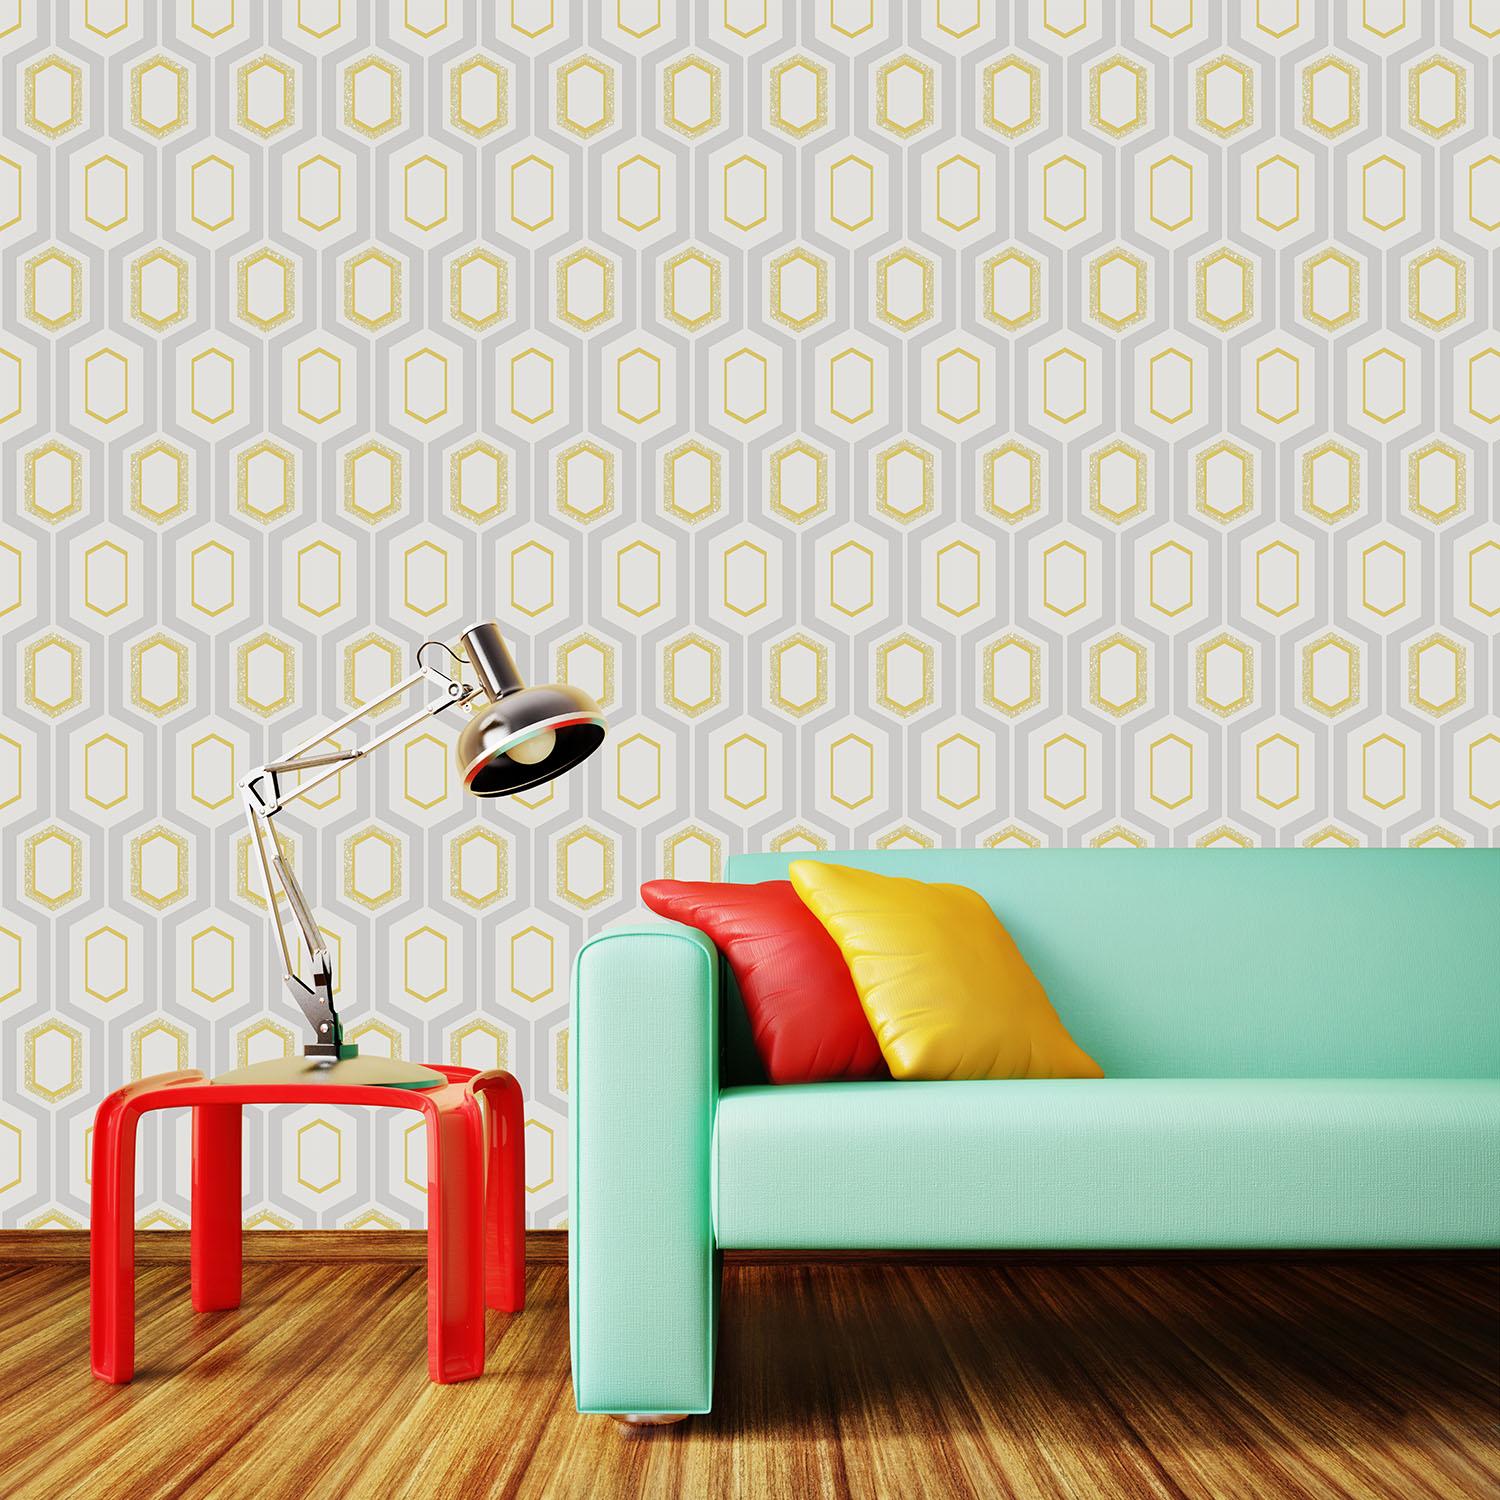 1500 x 1500 · jpeg - 4 spare room ideas using wallpaper - and how to make a small room look ...